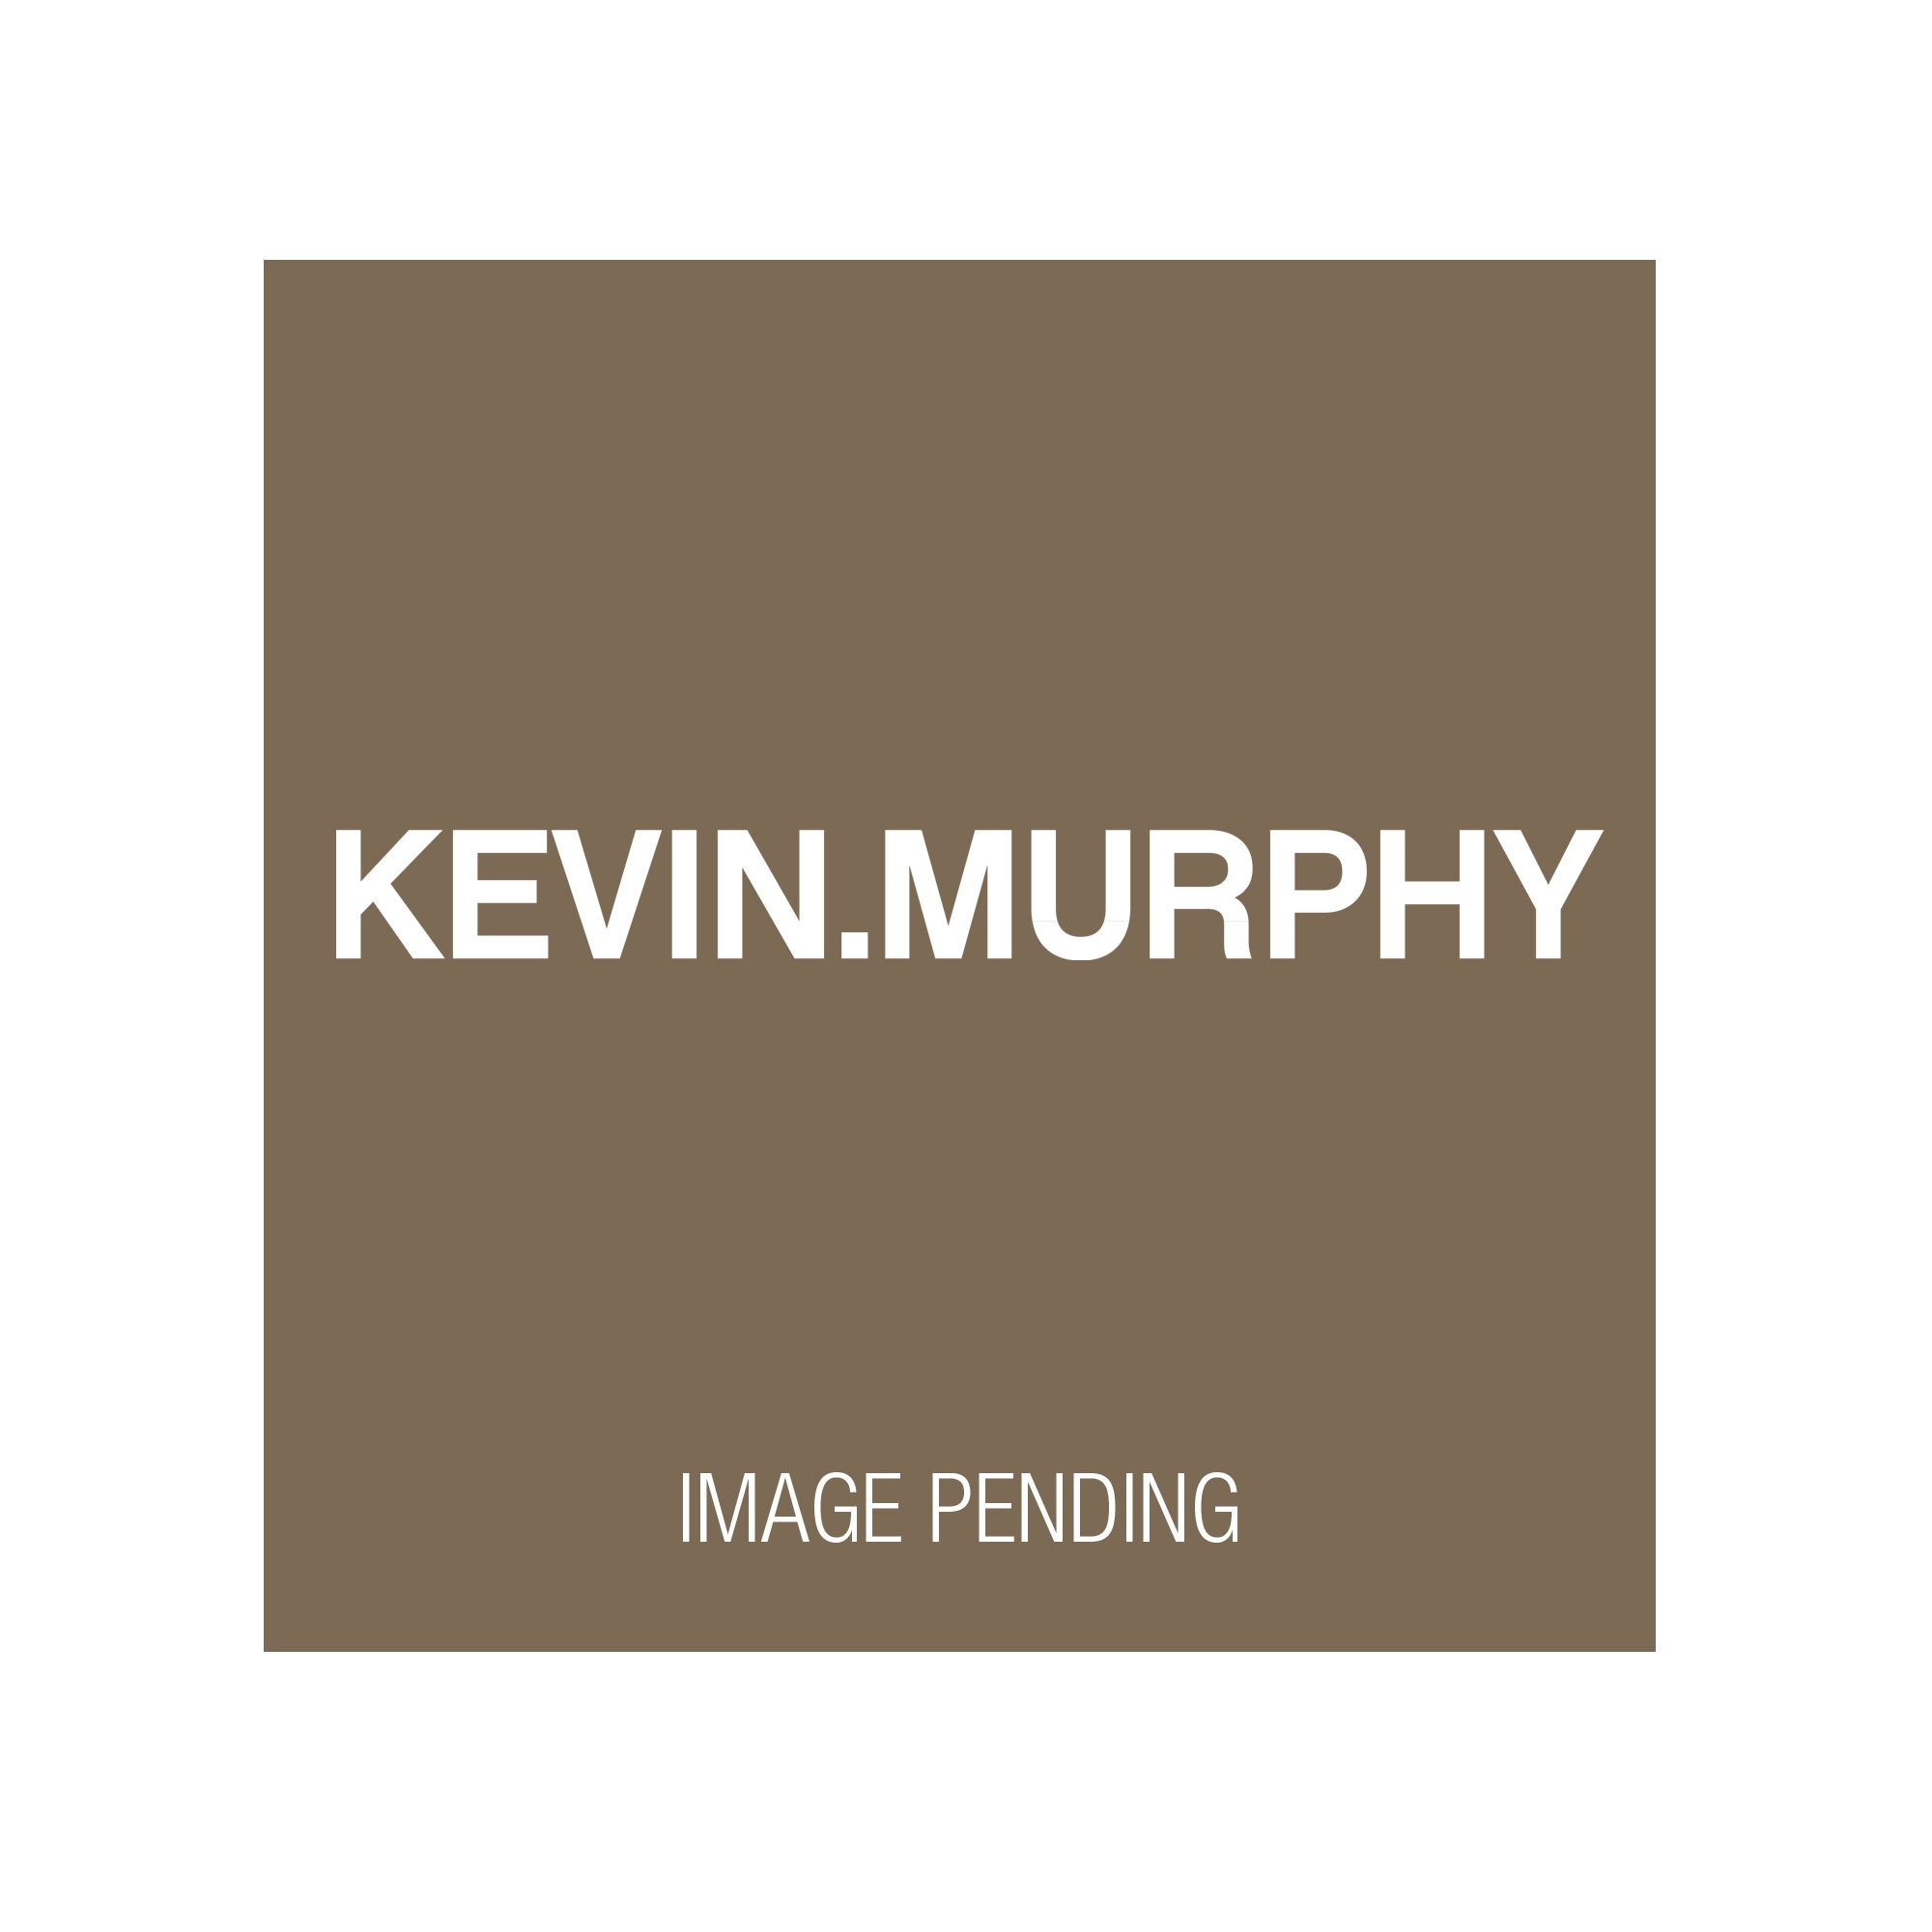 KEVIN.MURPHY COLOR.ME Swatches-Chocolate Ash Swatch Tent Card & Panel Insert